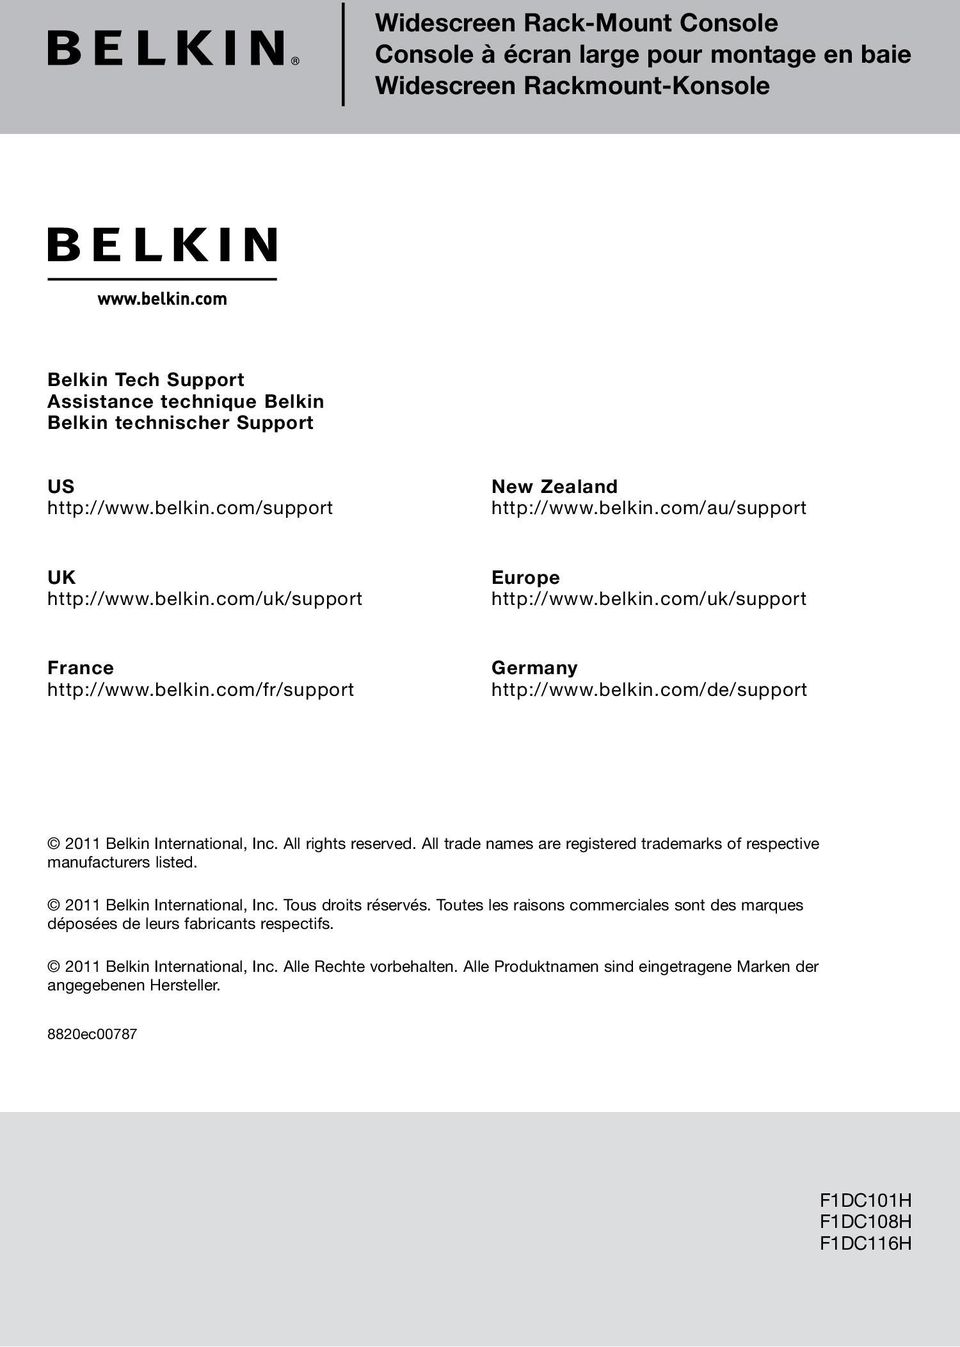 All rights reserved. All trade names are registered trademarks of respective manufacturers listed. 2011 Belkin International, Inc. Tous droits réservés.